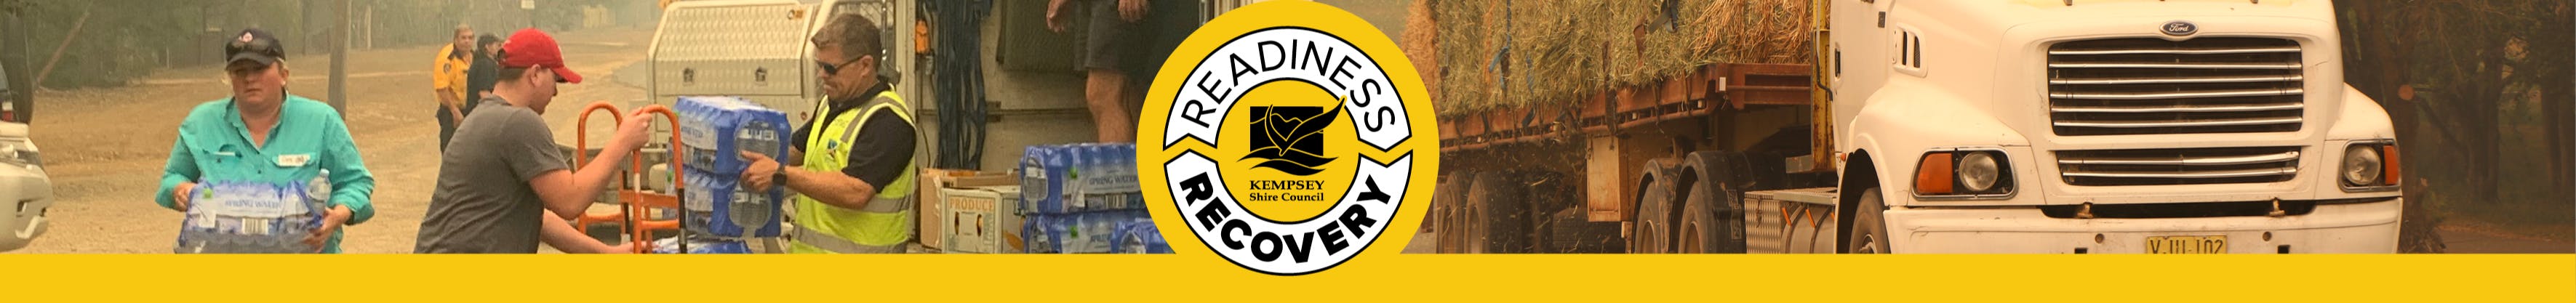 Readiness and Recovery - Kempsey Shire Council